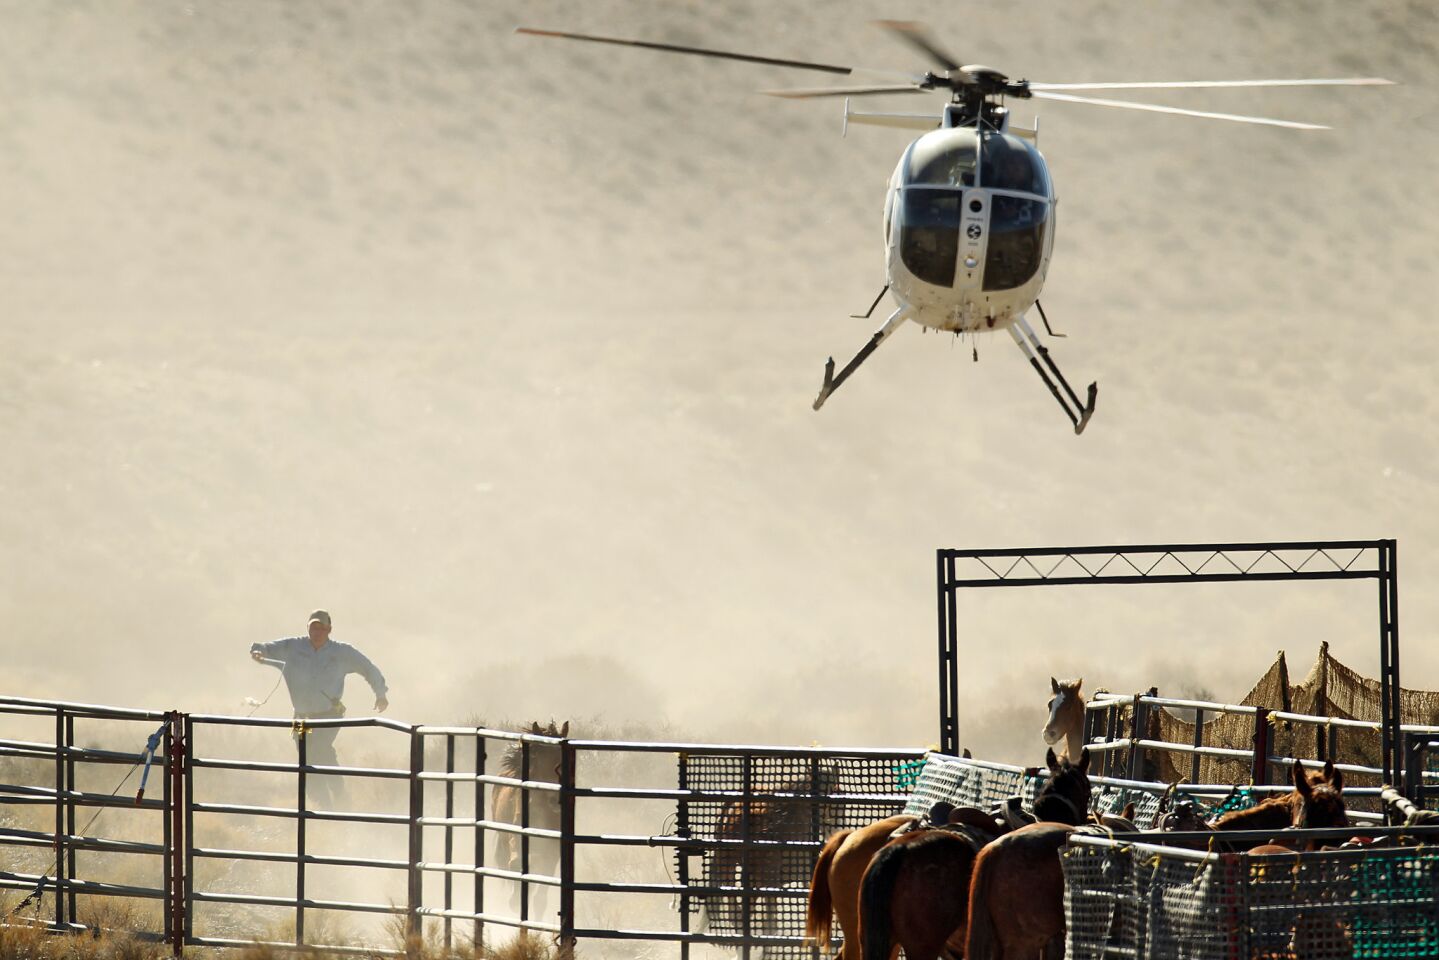 The Bureau of Land Management holds mustangs in temporary corrals before hauling them away.